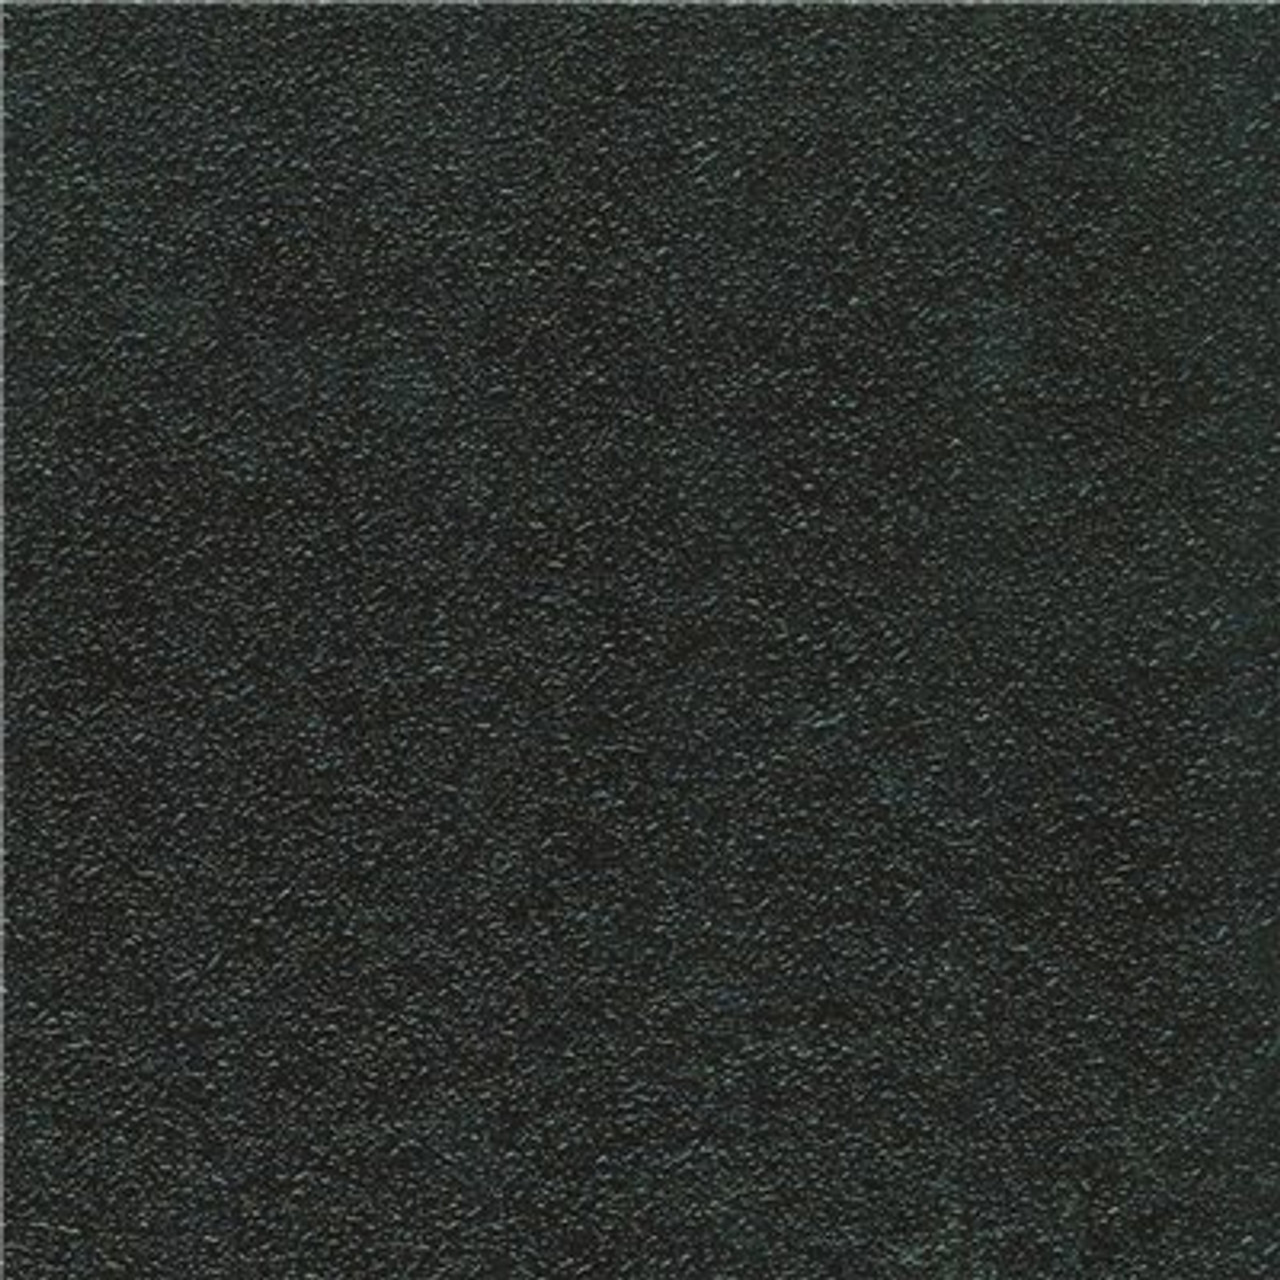 Rubber King Pro Series Black-01 8 Mm 38 In. W X 38 In. L Square Rubber Tile (970 Sq. Ft.)